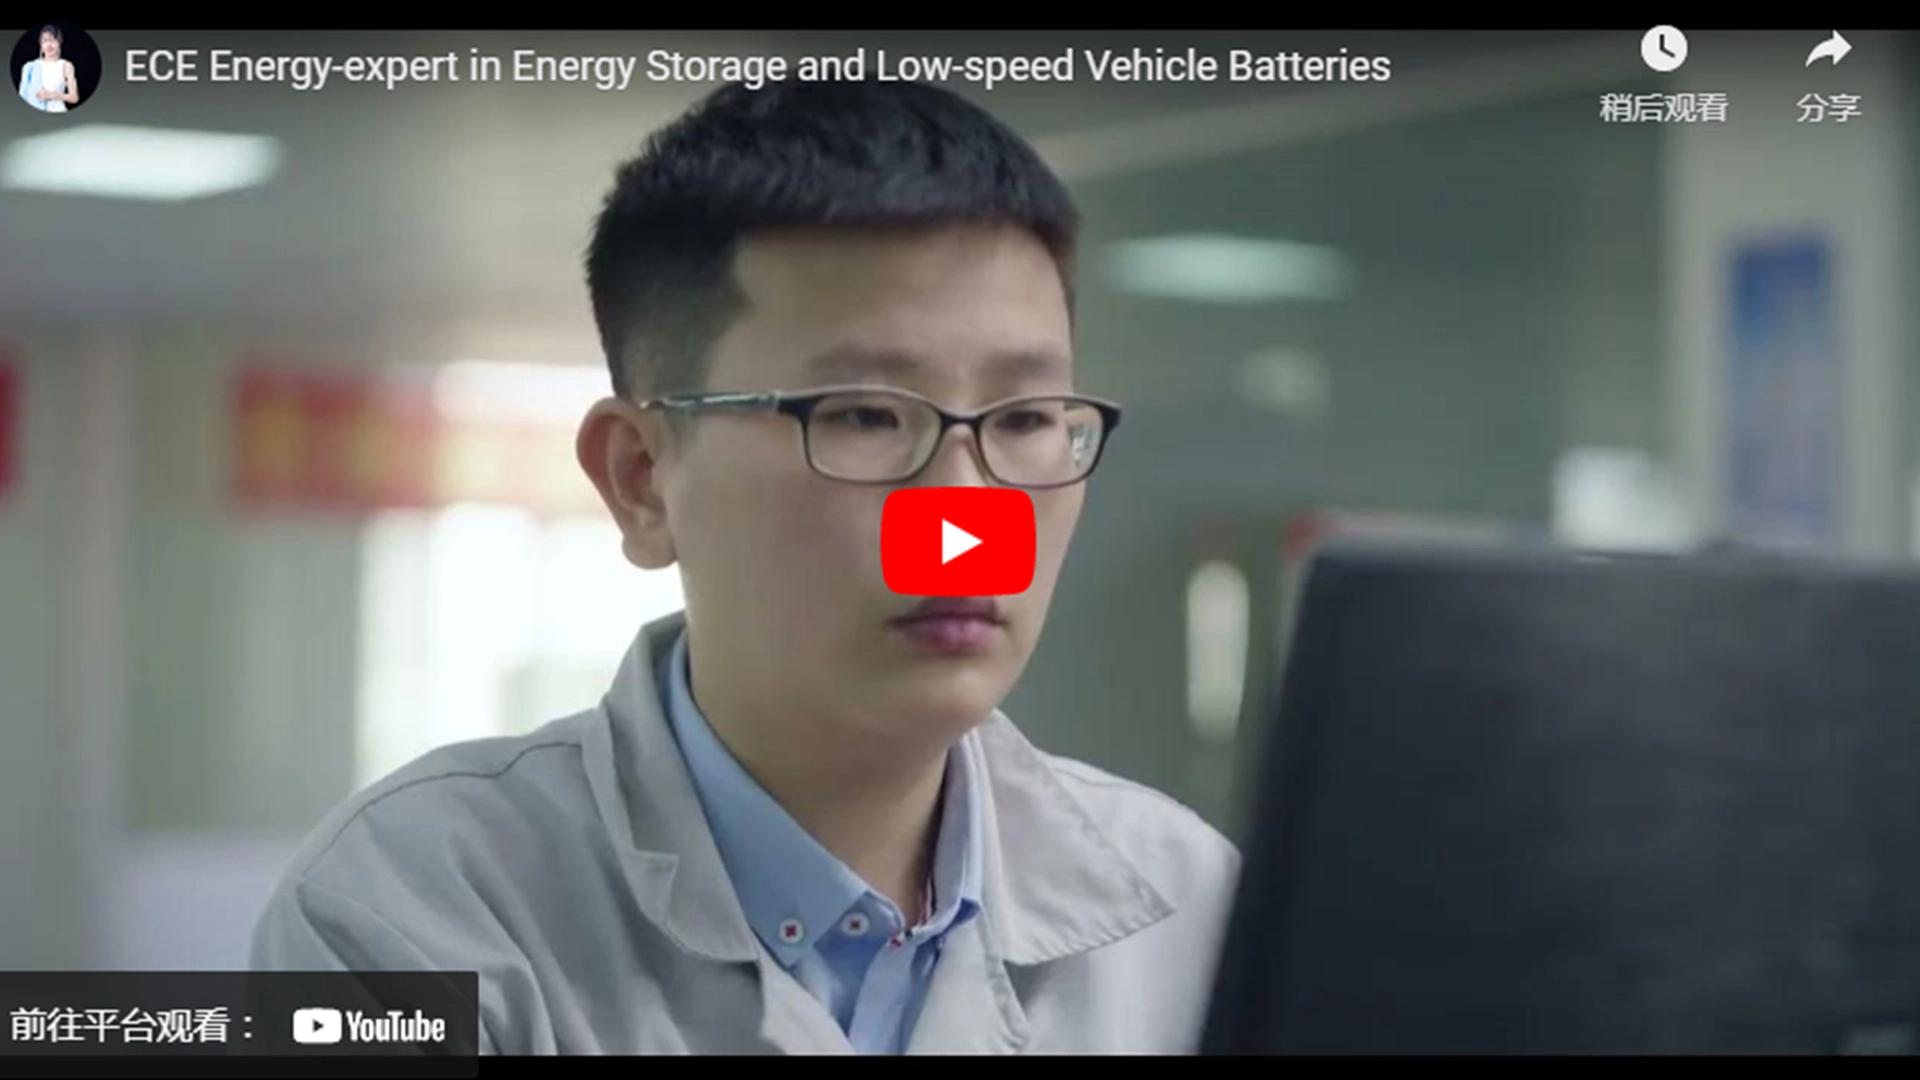 ECE Energy-expert in Energy Storage and Low-speed Vehicle Batteries